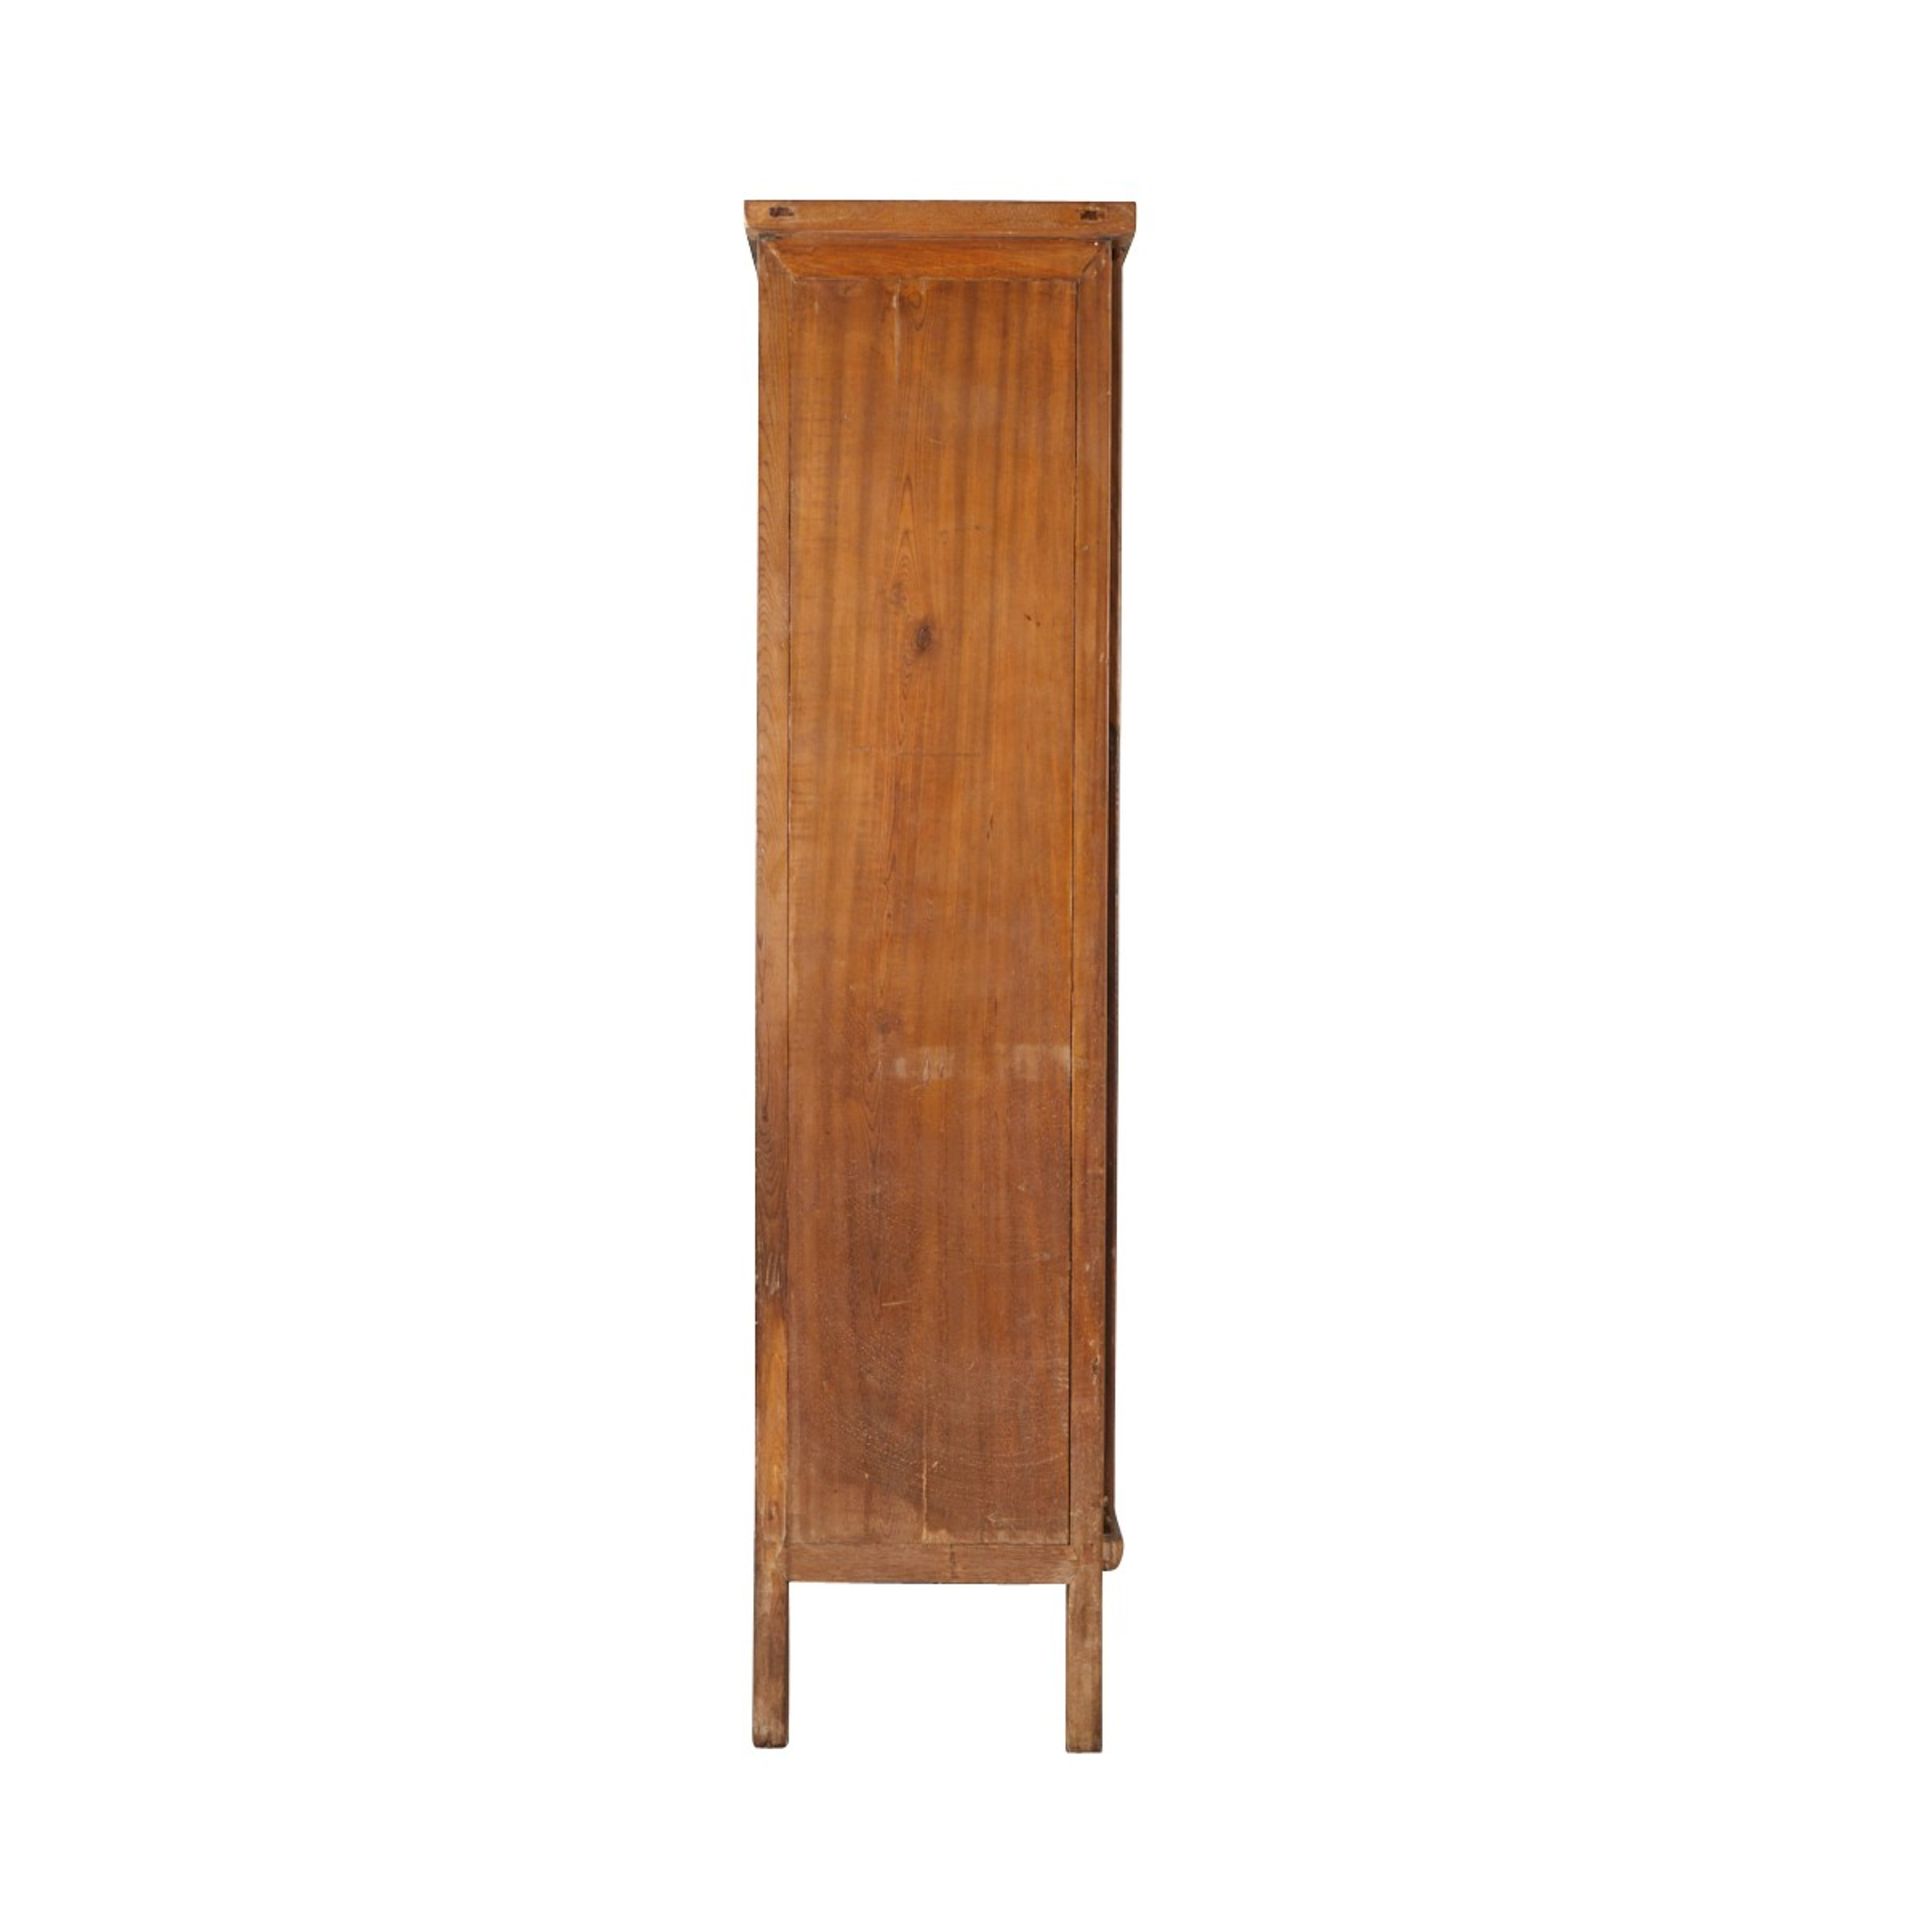 Antique Chinese Wood Cabinet or Wardrobe - Image 6 of 15